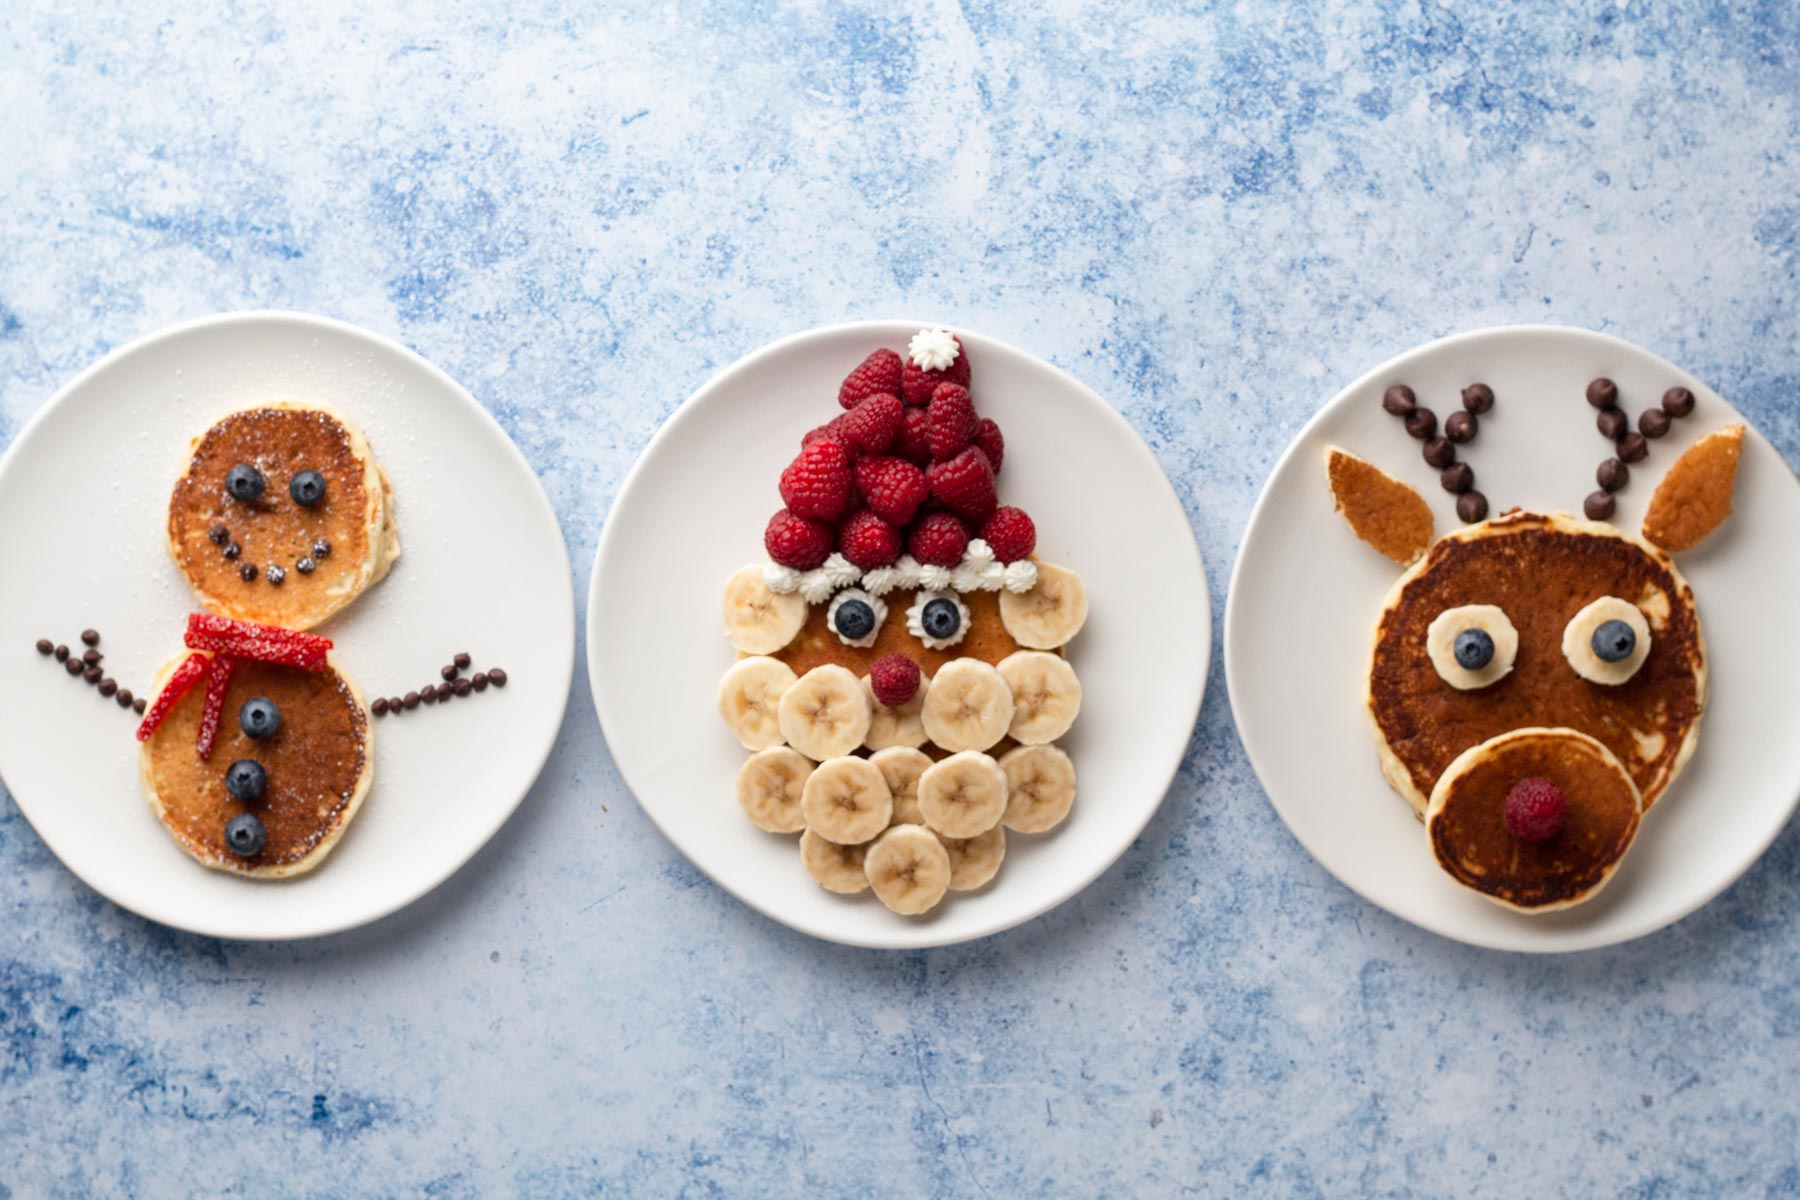 Pancakes on white plates decorated like a snowman, Santa, and a reindeer.